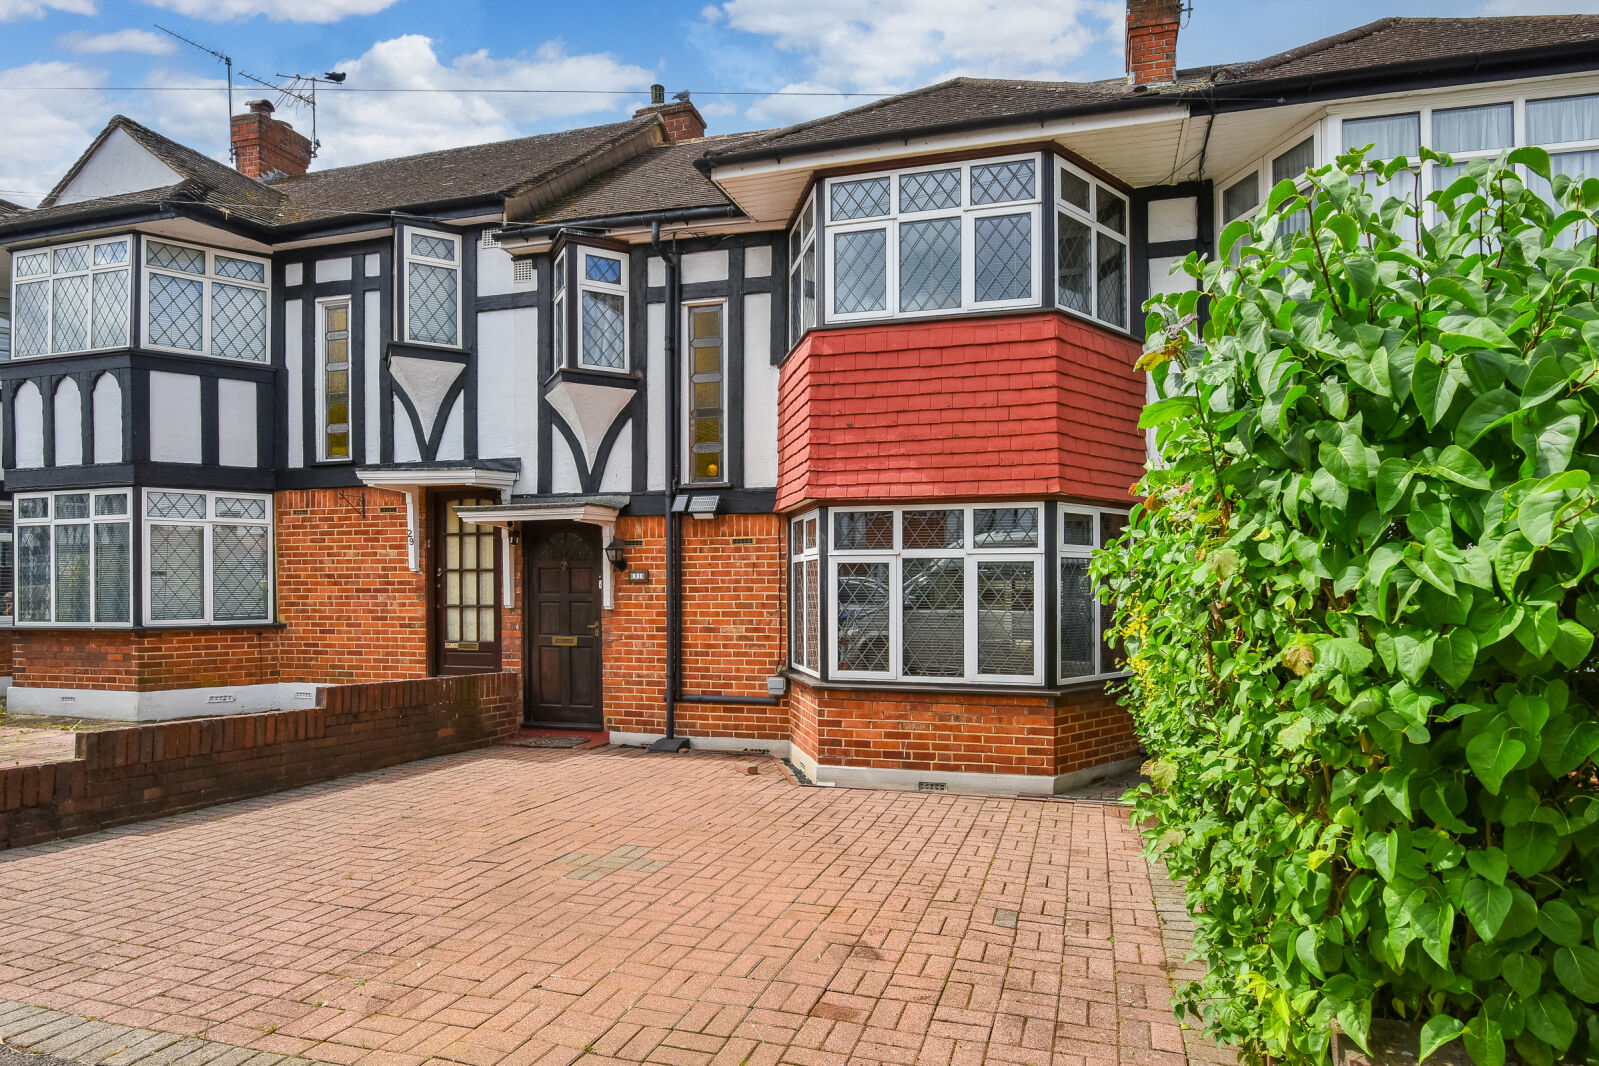 3 bedroom mid terraced house for sale Seymour Avenue, Morden, SM4, main image